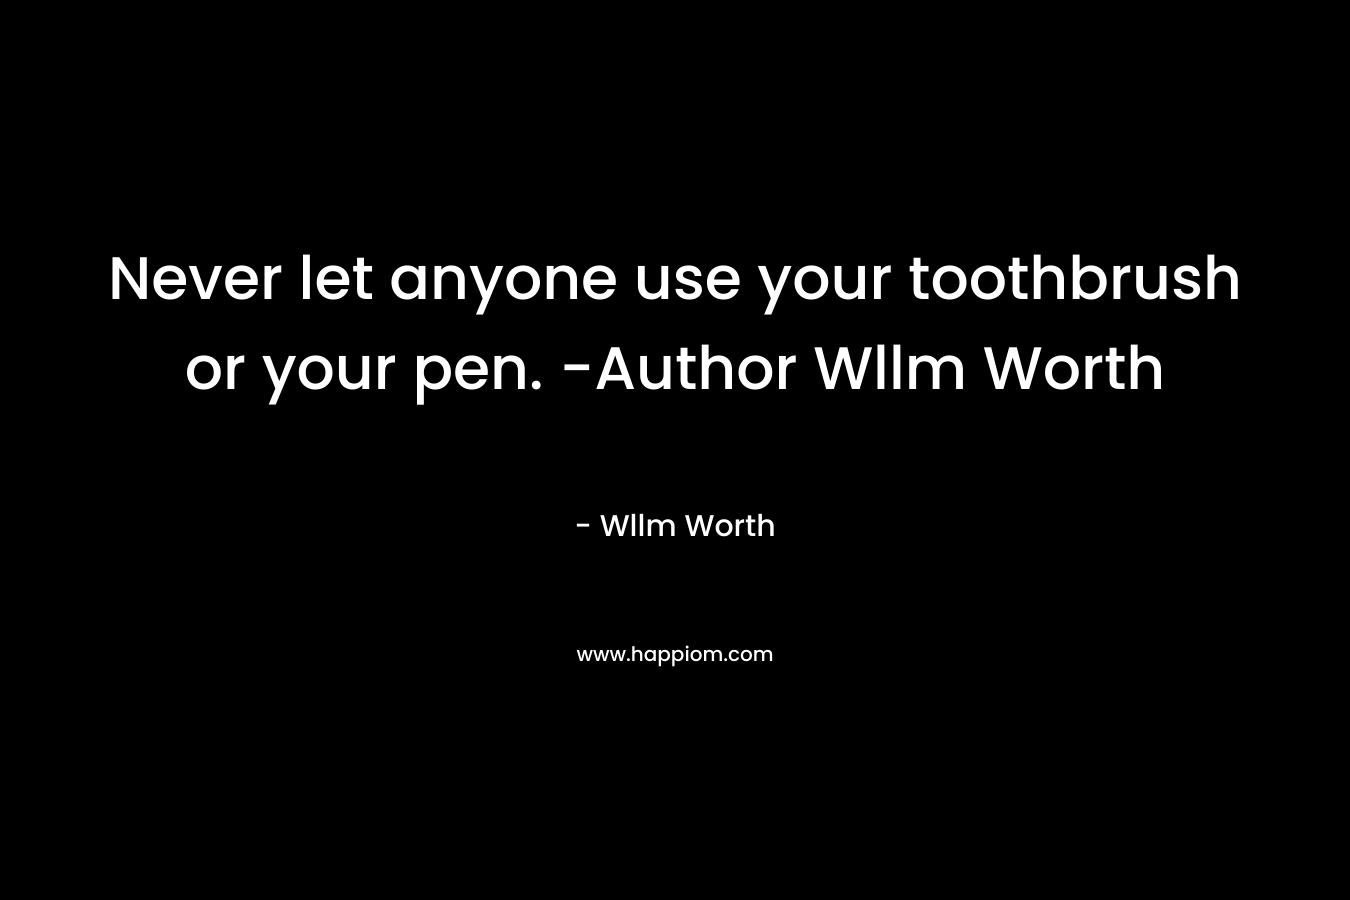 Never let anyone use your toothbrush or your pen. -Author Wllm Worth